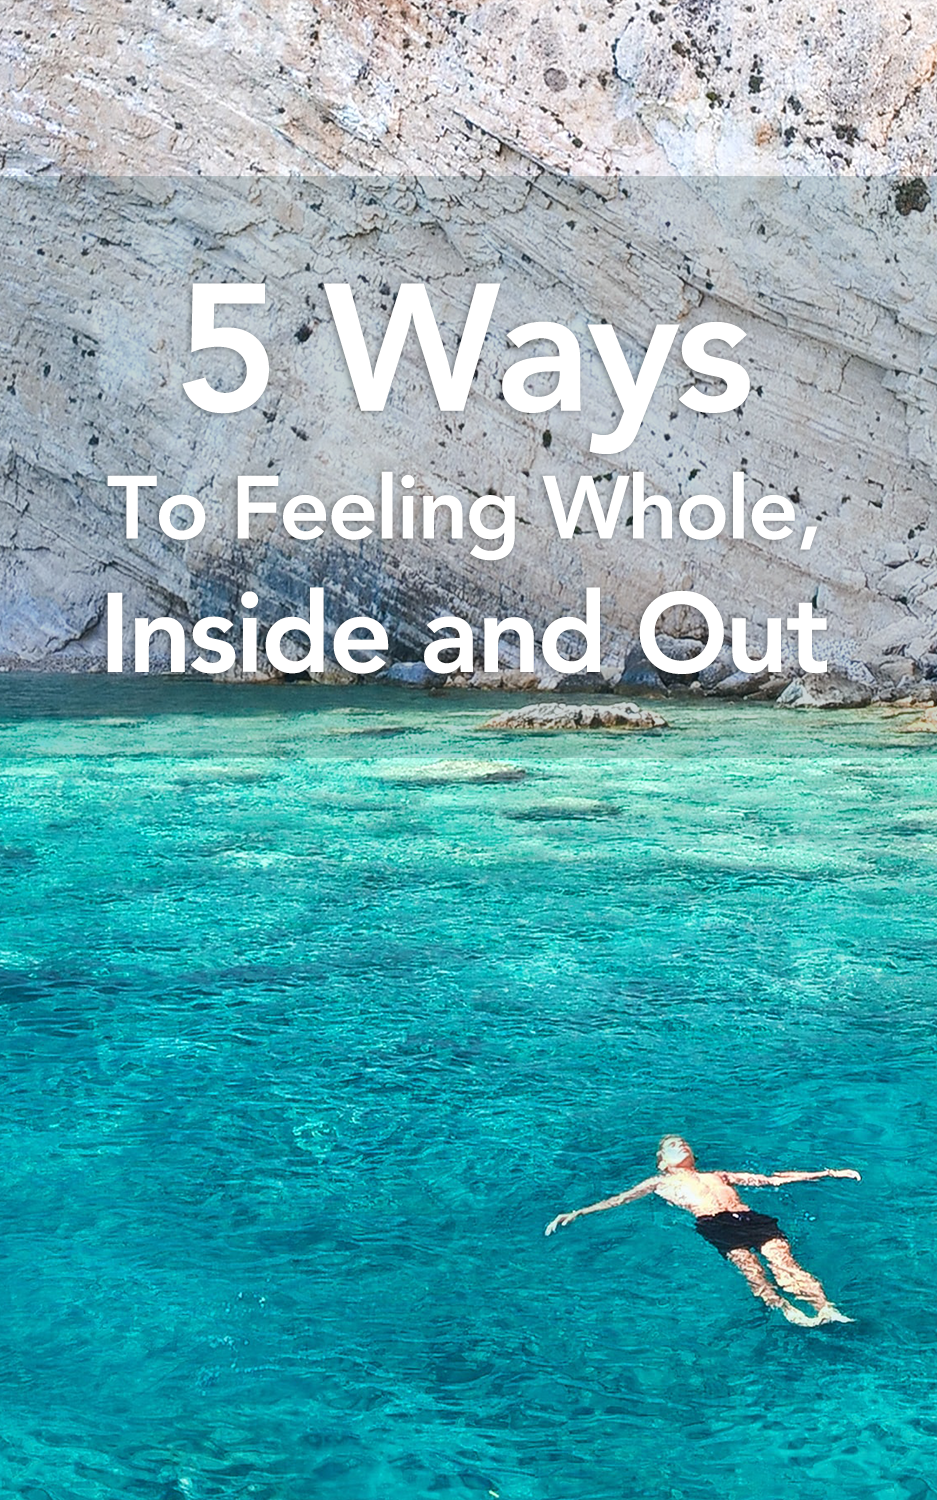 5 Ways To Feeling Whole, Inside and Out